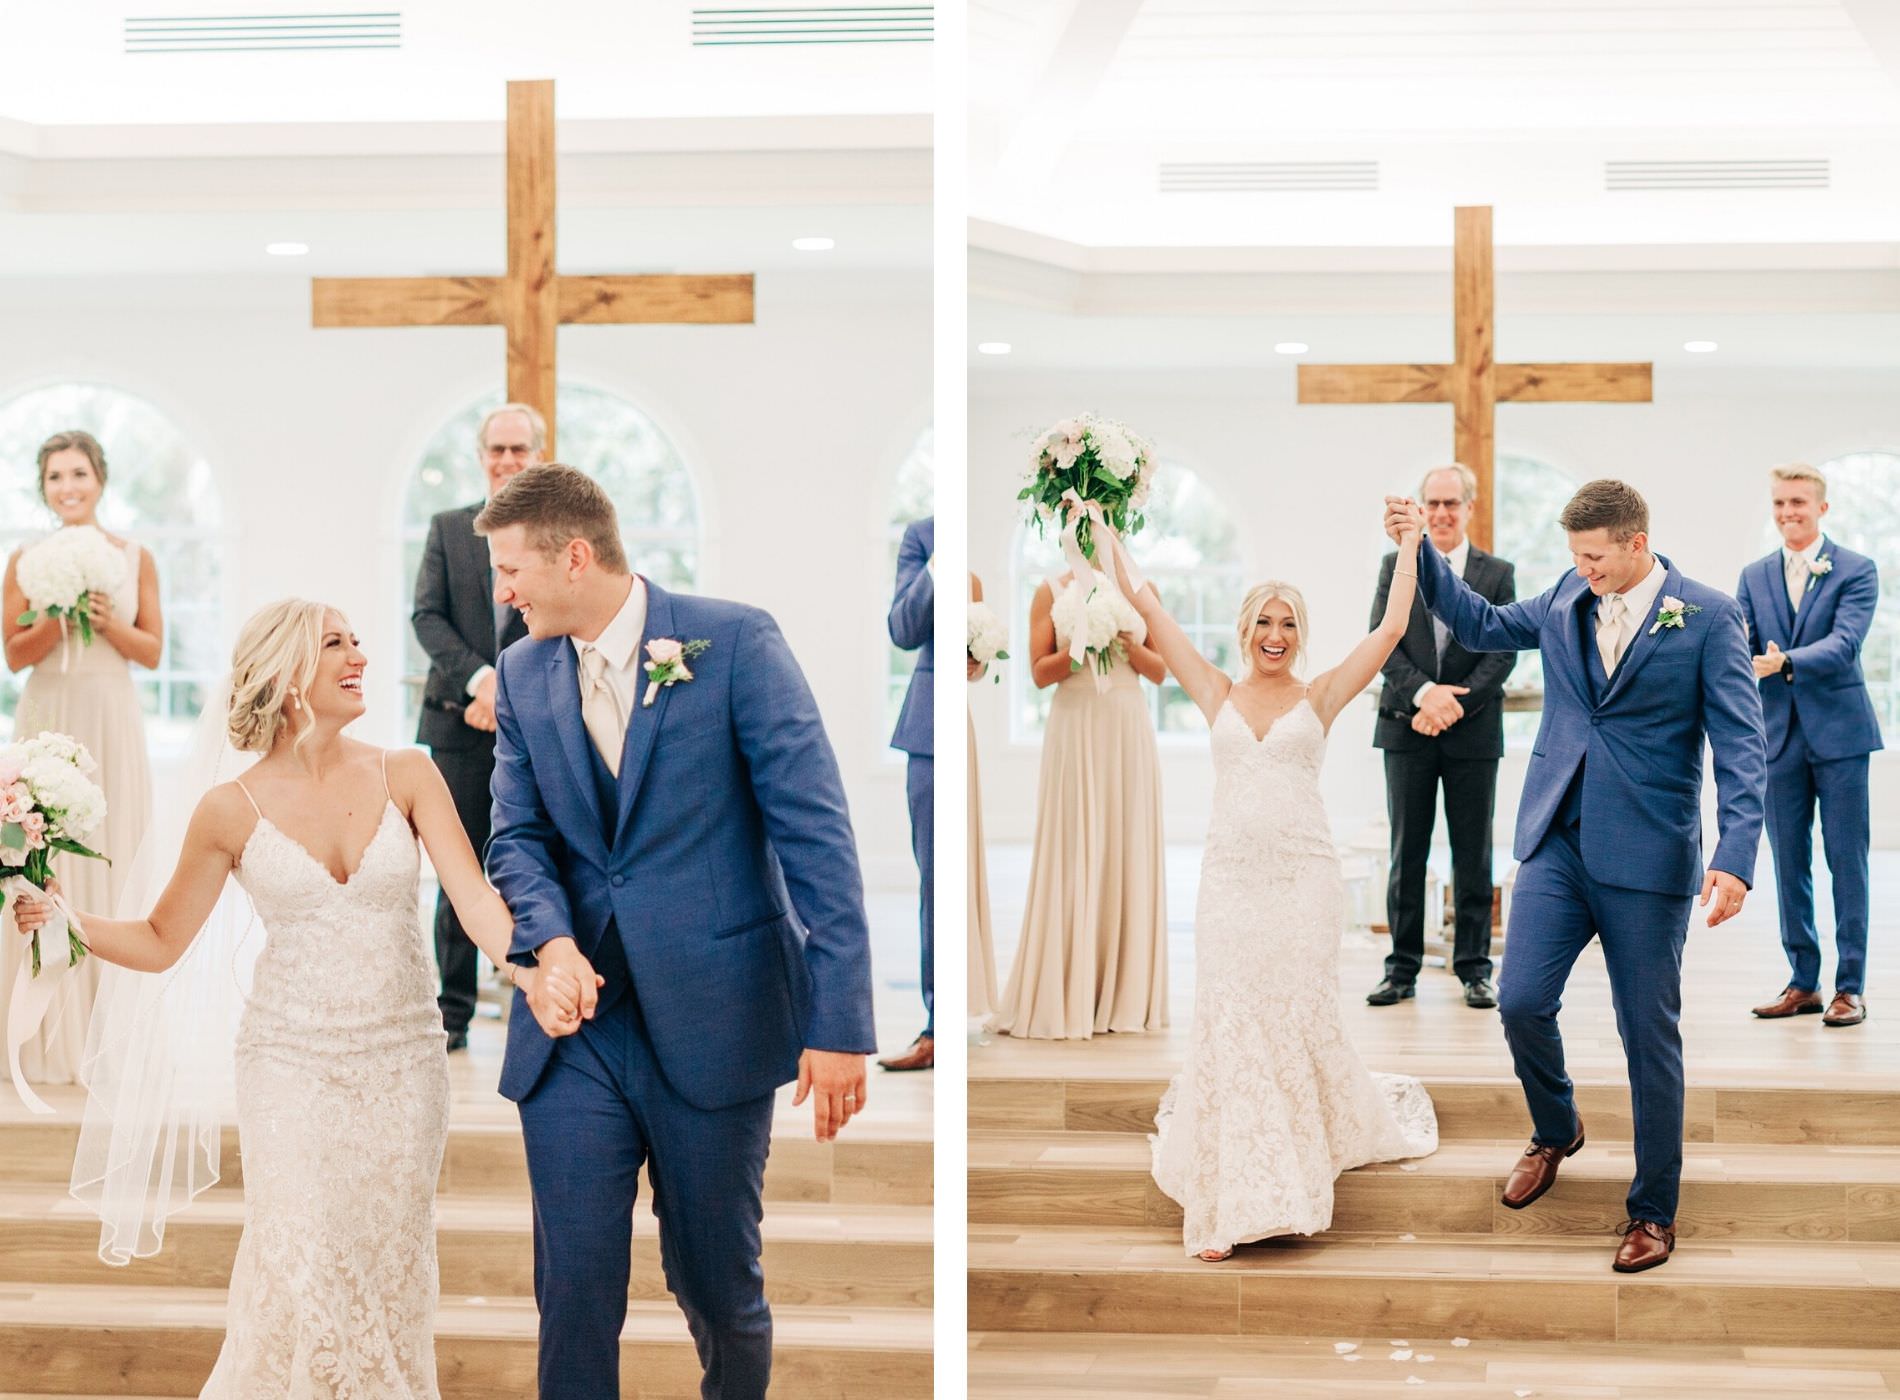 Bride and Groom Ceremony Exit After Being Pronounced Husband and Wife | Groom in Navy Blue Suit | Ivory and Champagne Lace Bridal Gown Wedding Dress